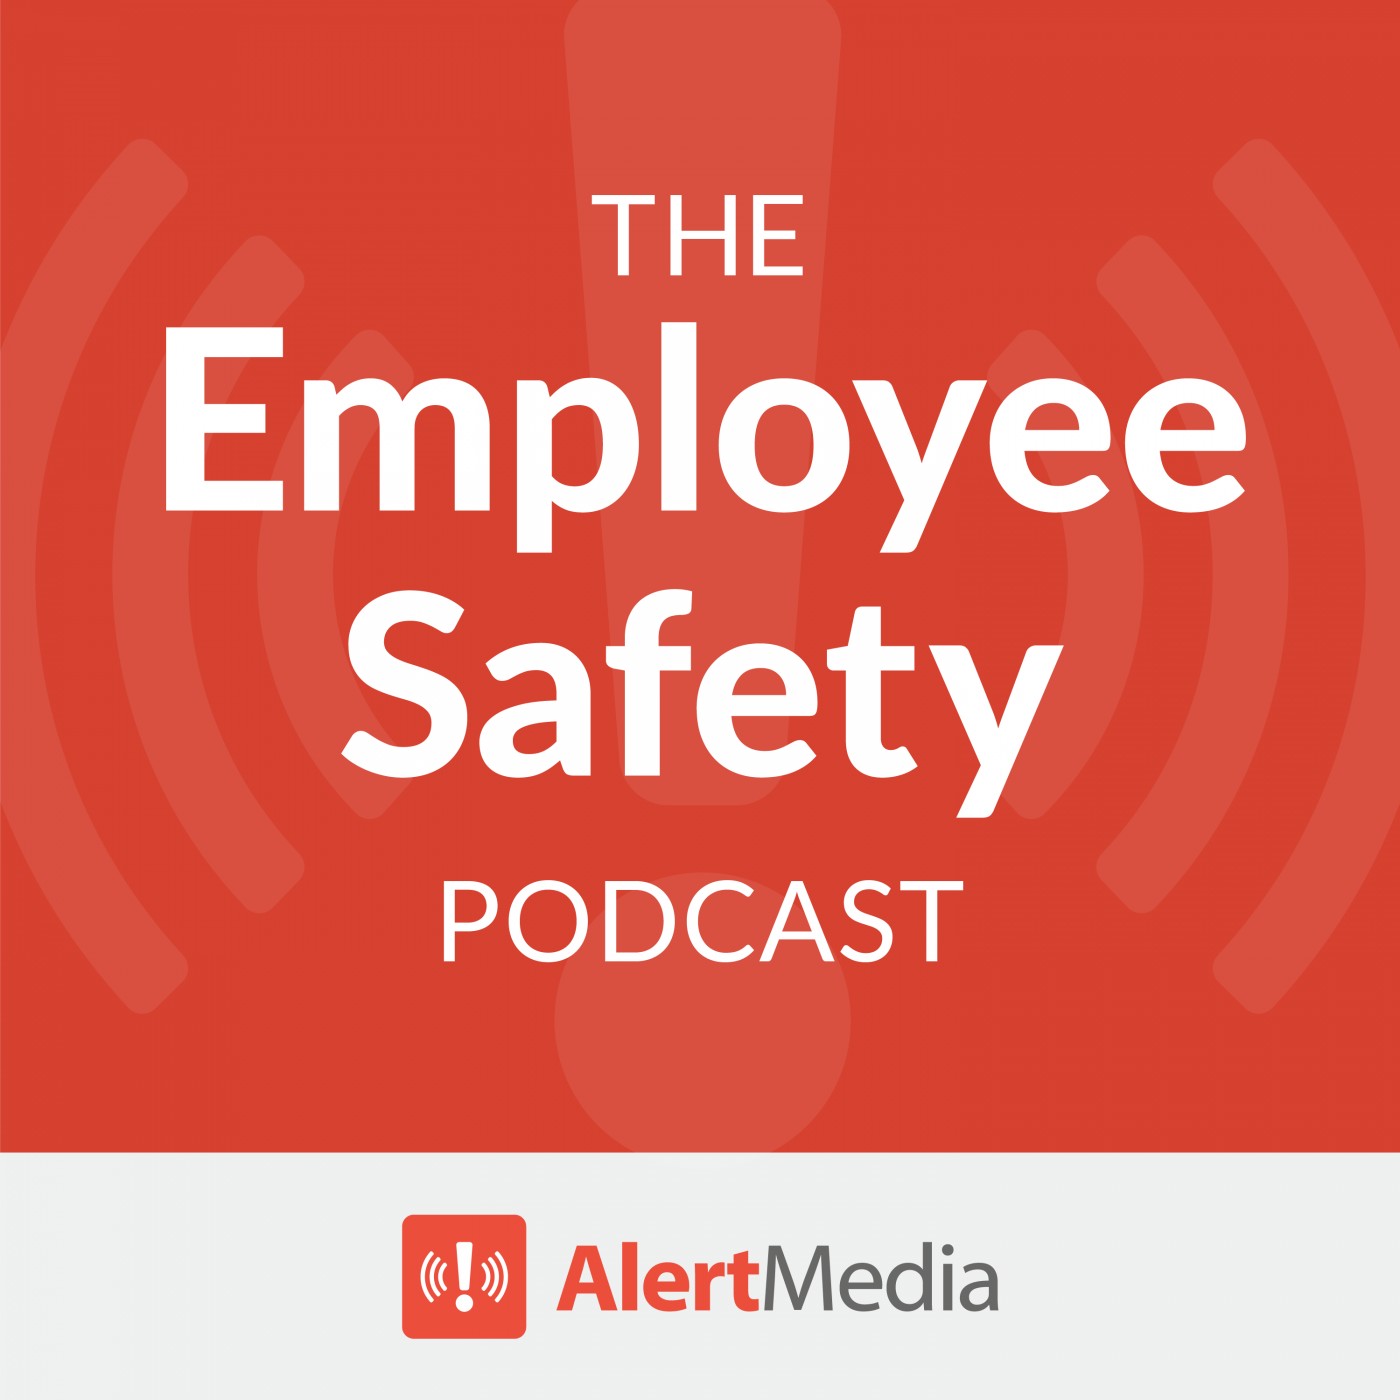 Artwork for podcast The Employee Safety Podcast